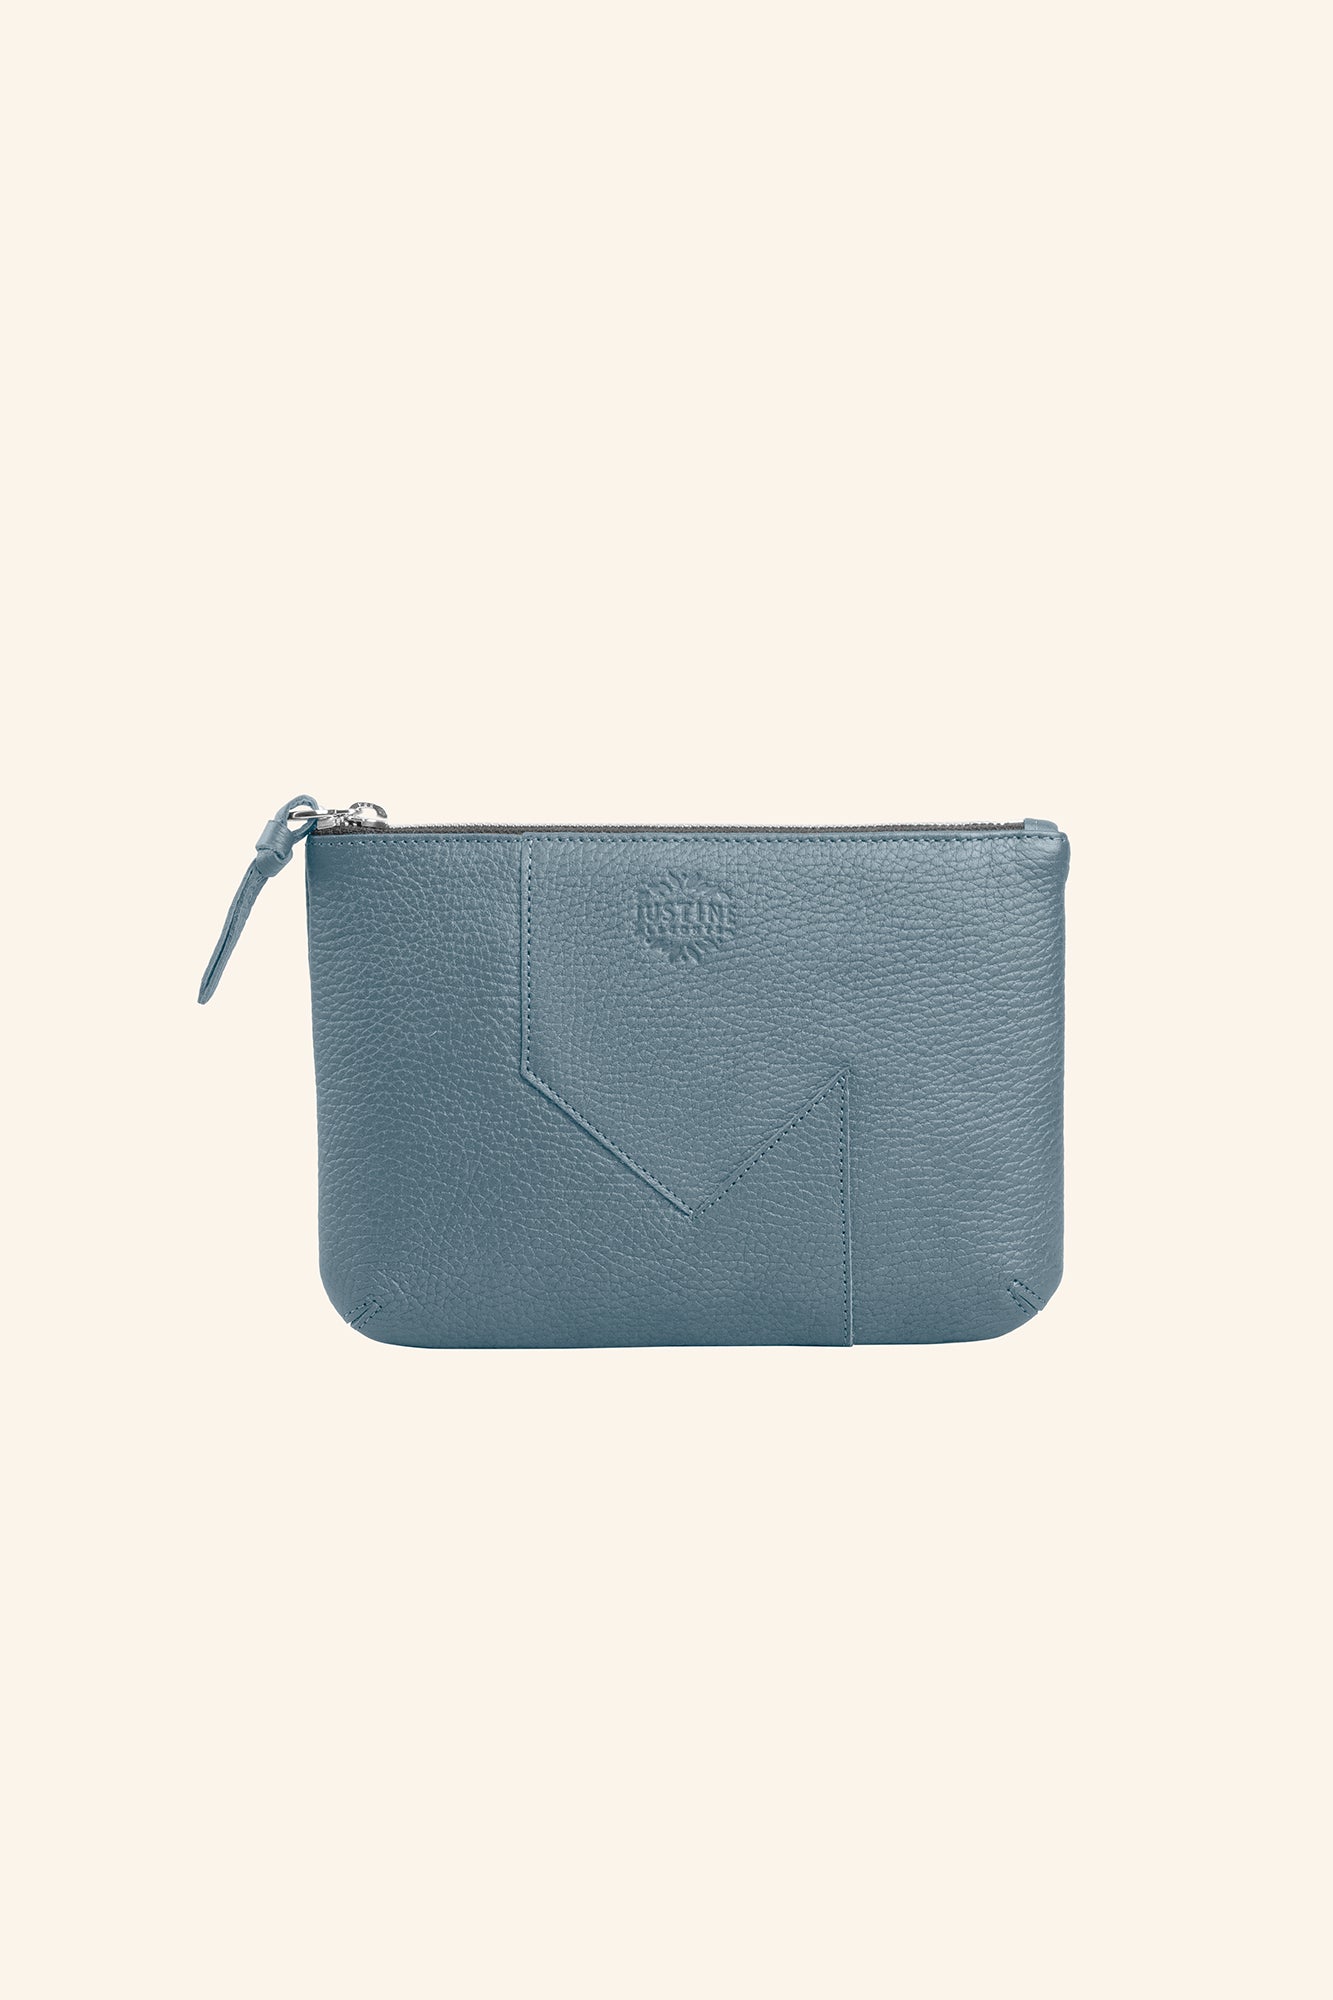 JL pouch leather - Stone blue